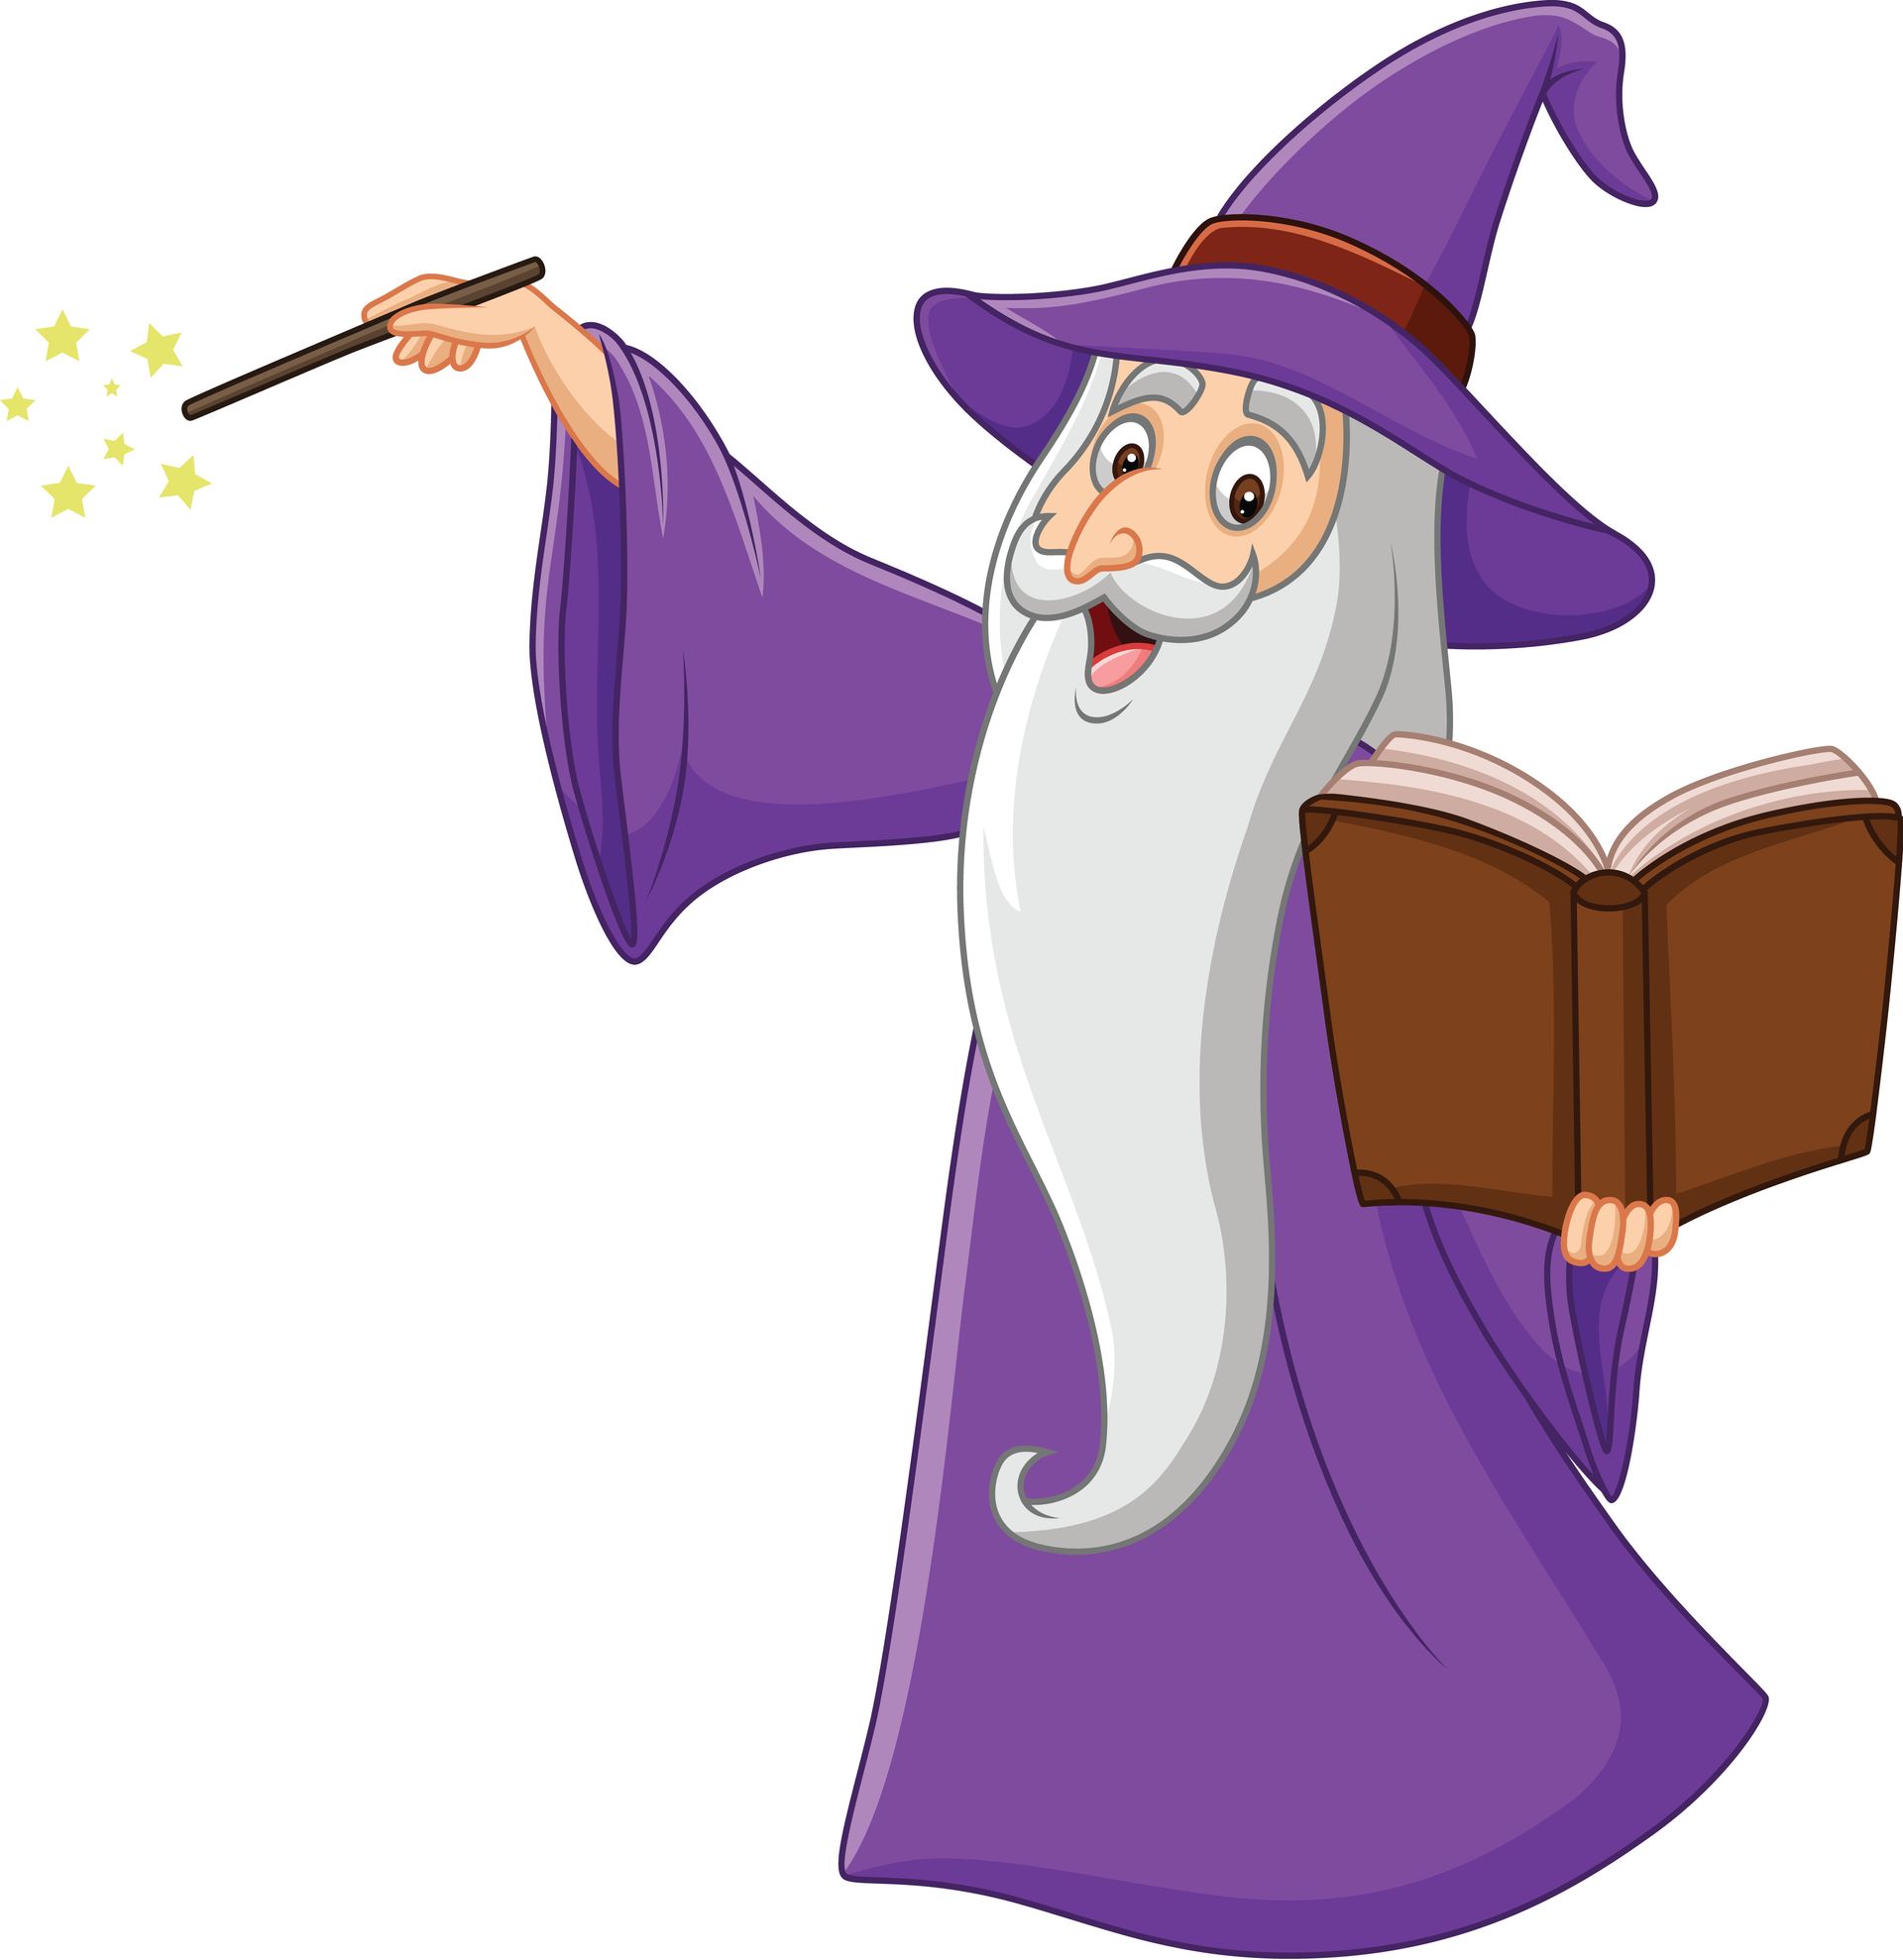 A cartoon wizard is holding a book and a wand.